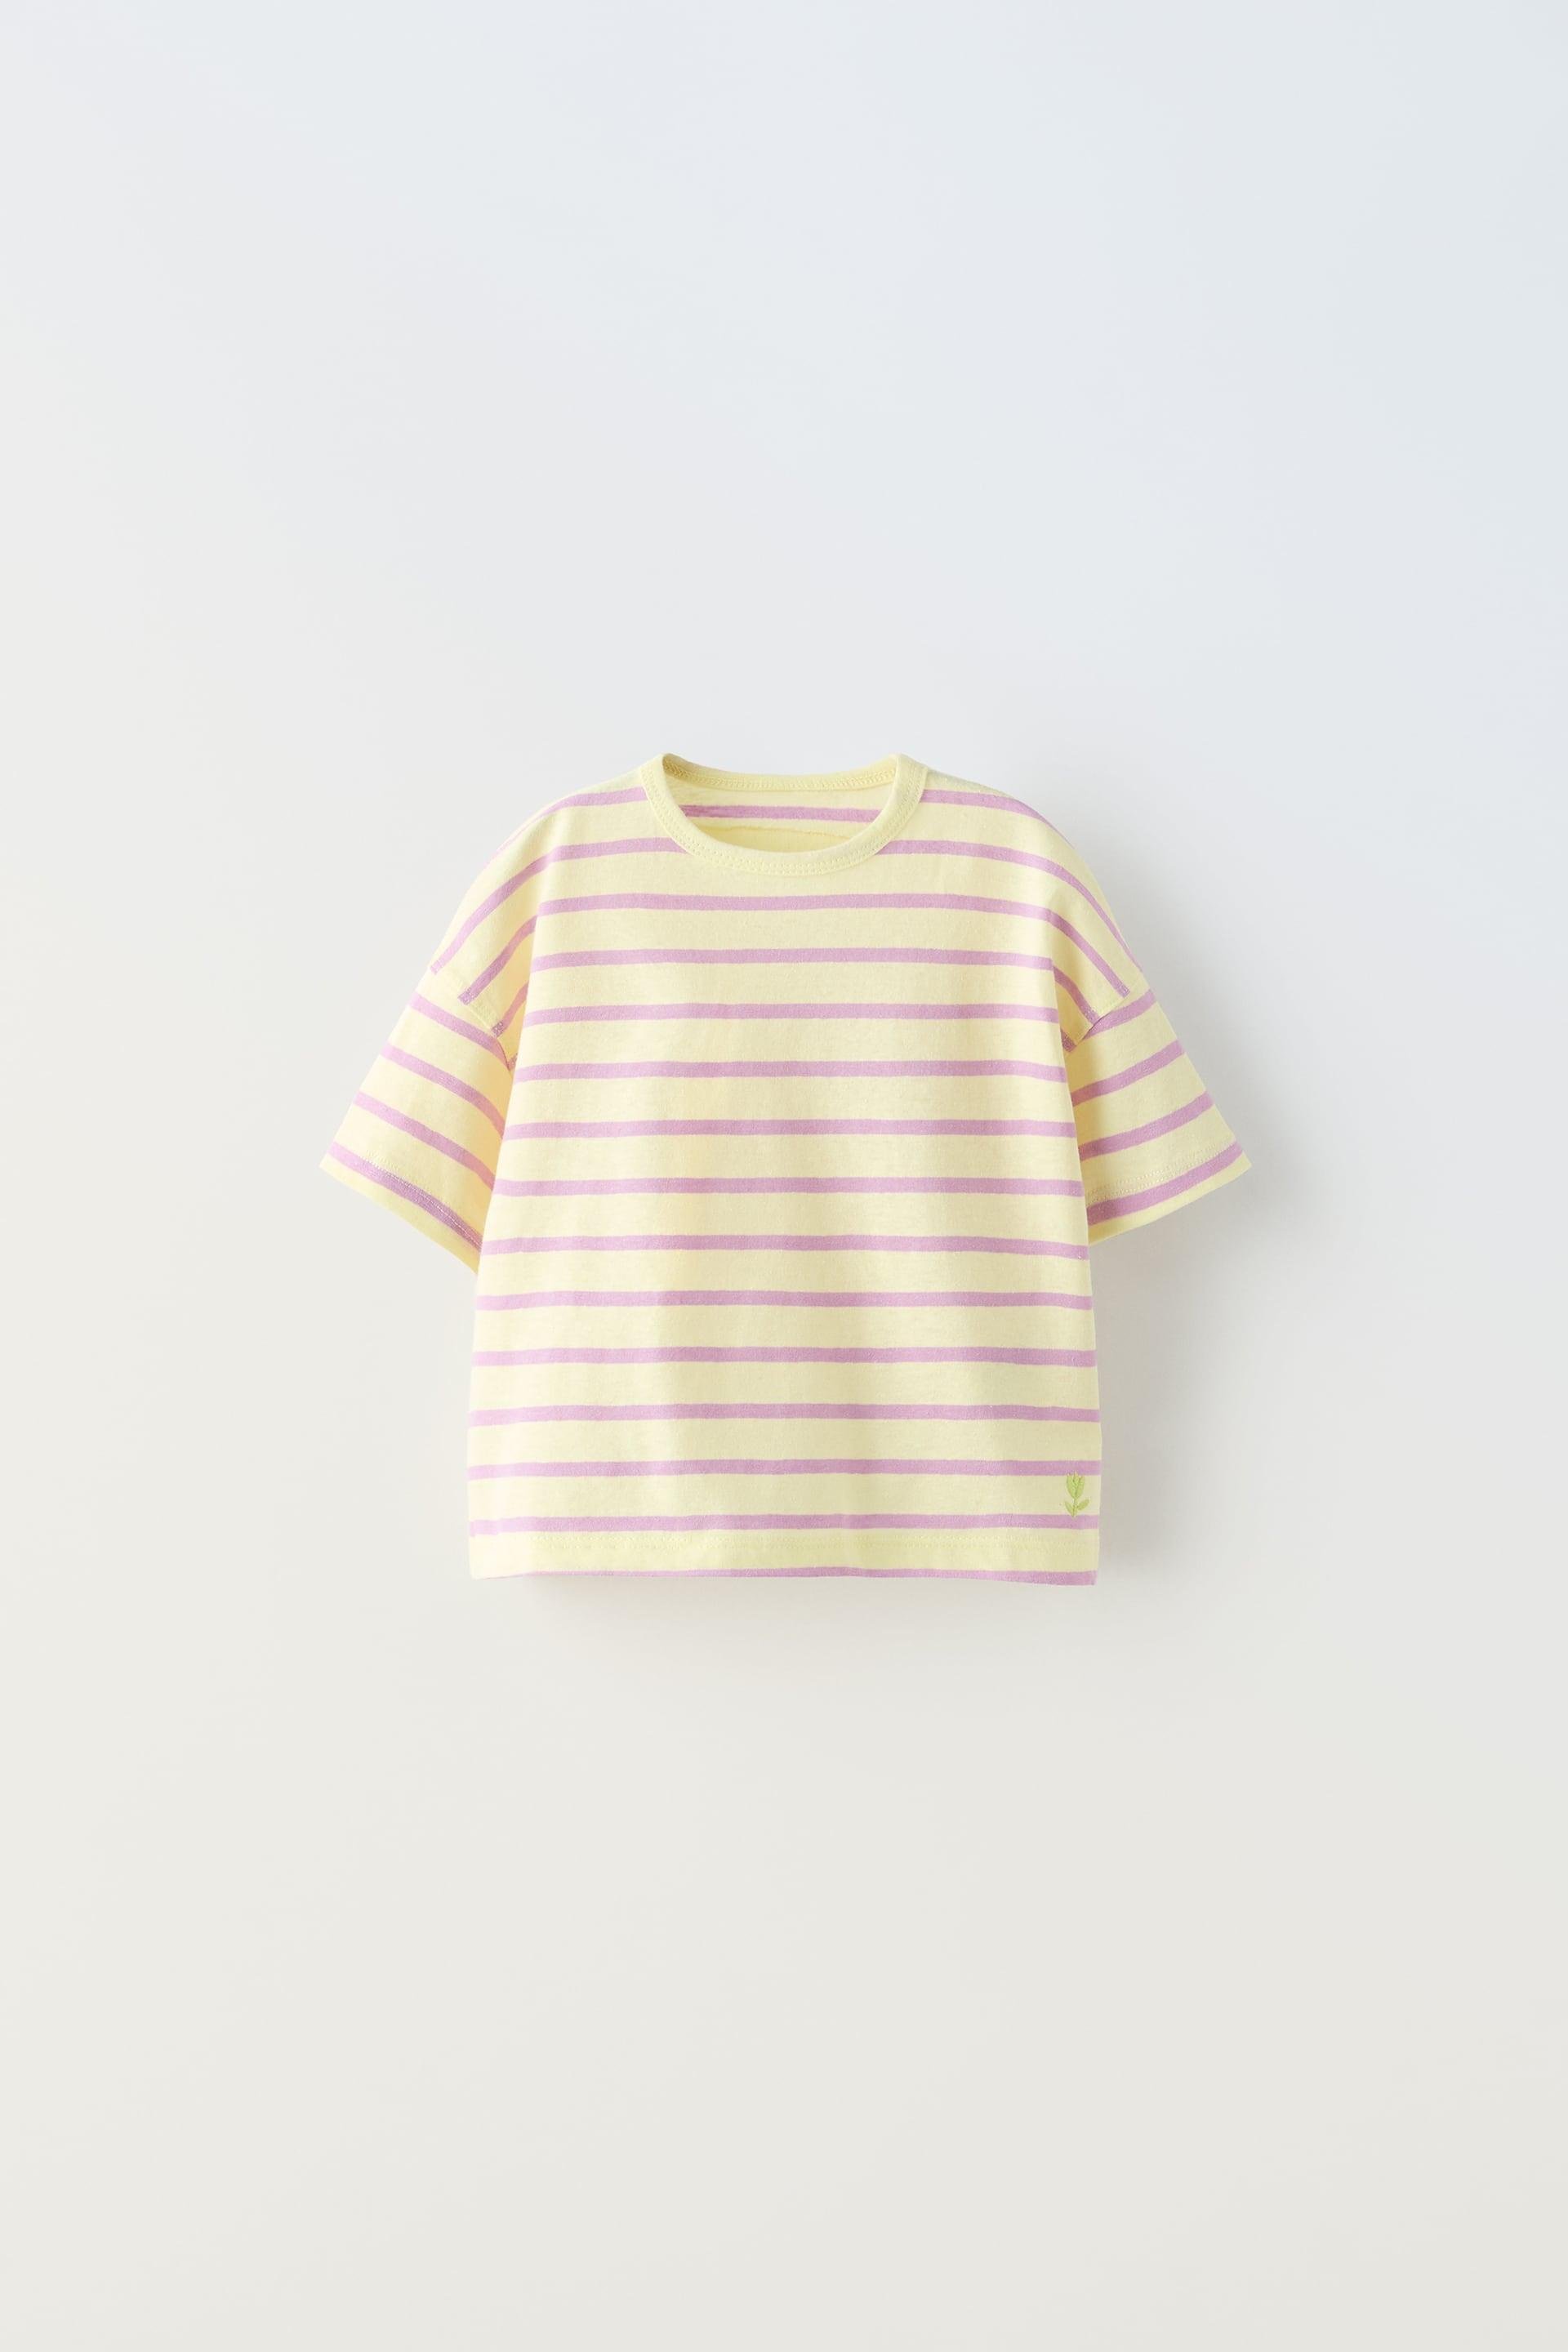 WOVEN EMBROIDERED STRIPED T-SHIRT by ZARA